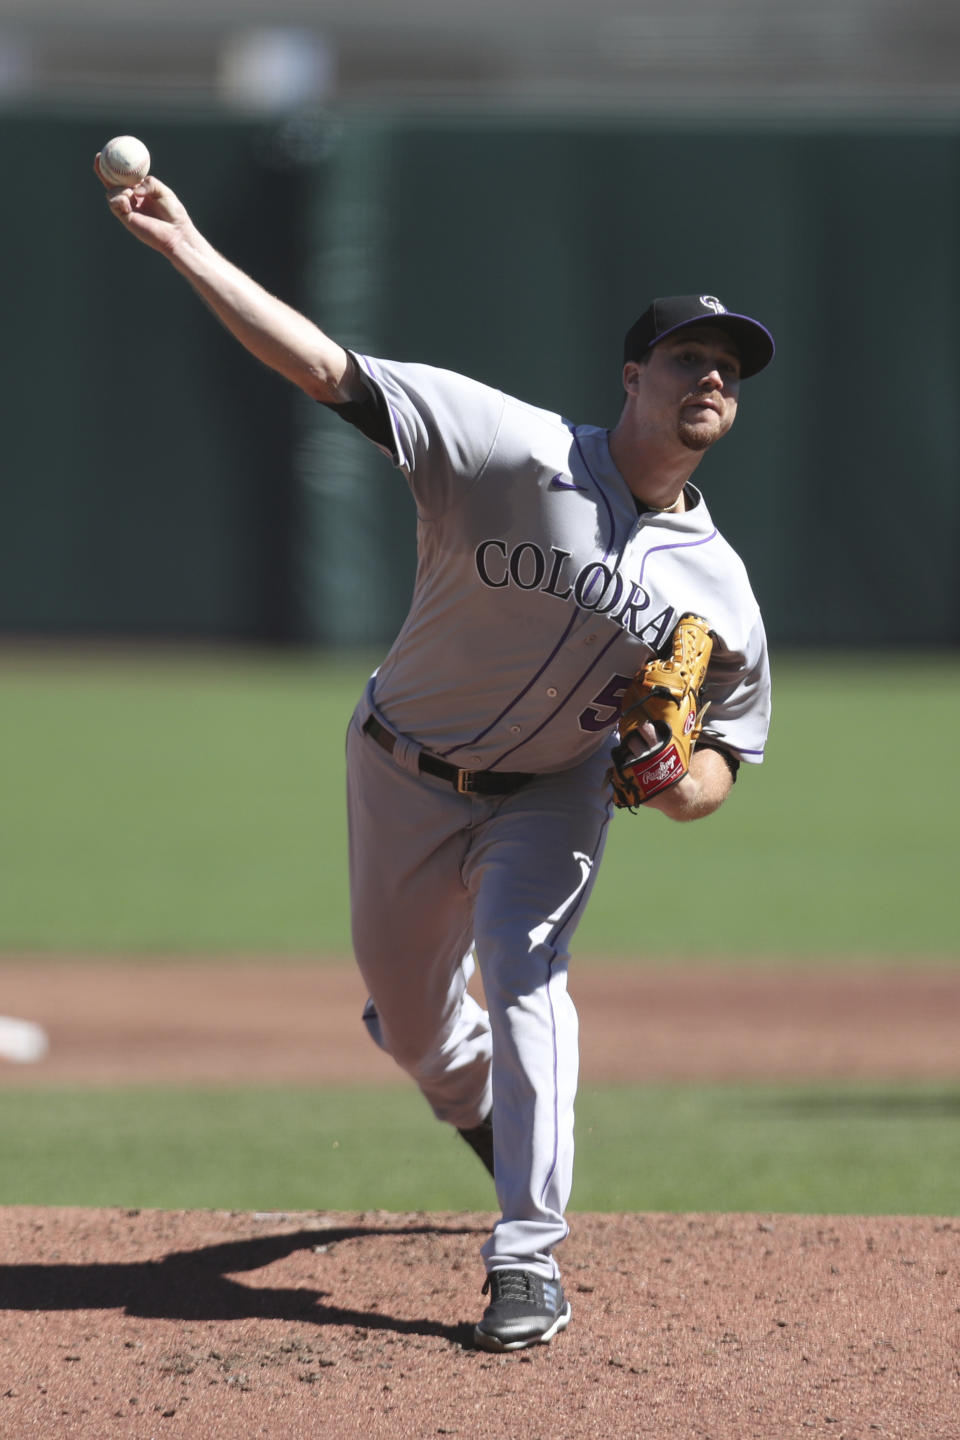 Colorado Rockies' Chi Chi González throws against the San Francisco Giants during the second inning of a baseball game in San Francisco, Thursday, Sept. 24, 2020. (AP Photo/Jed Jacobsohn)